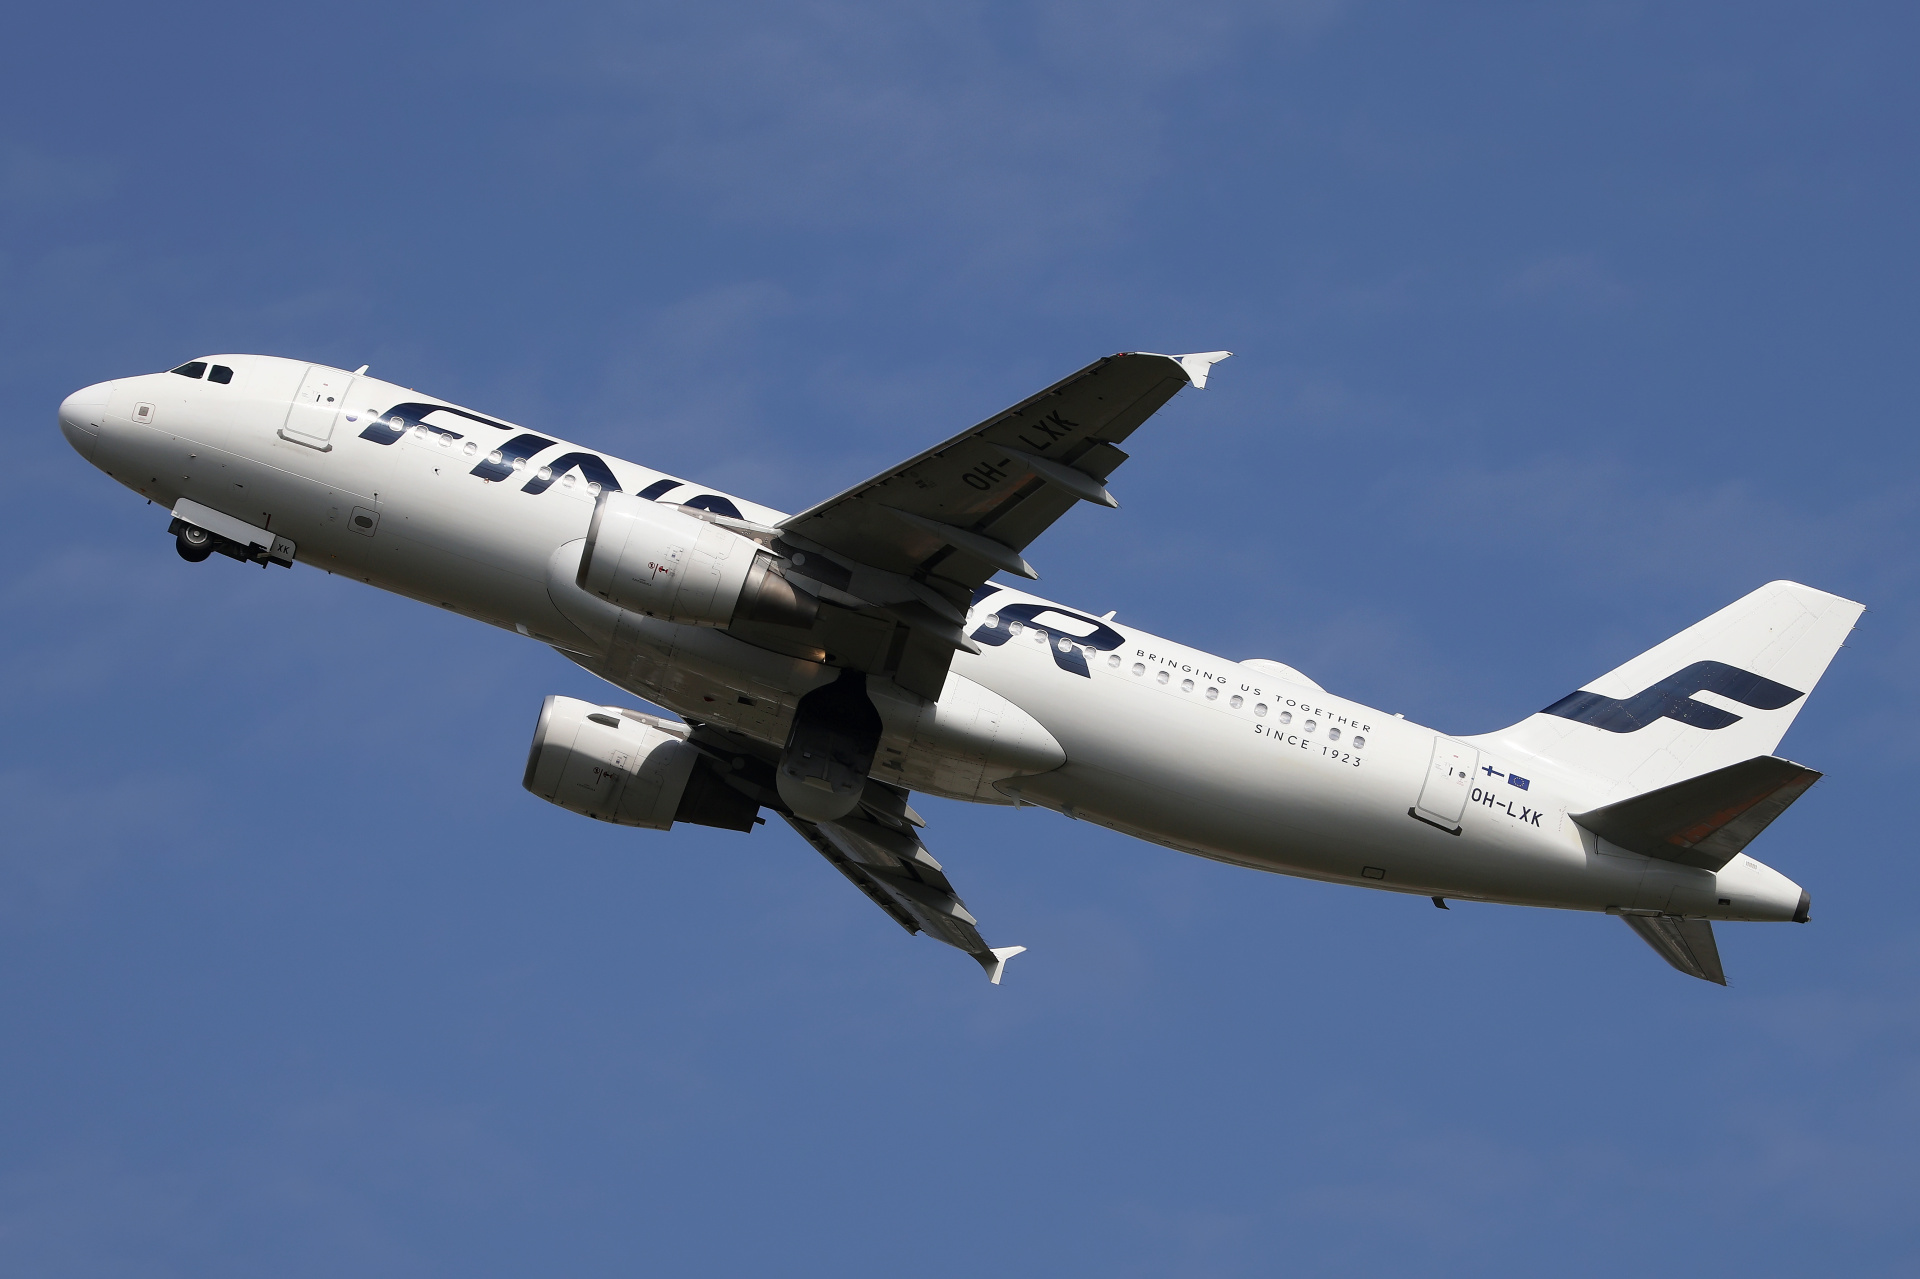 OH-LXK, Finnair (new livery, Bringing Us Together Since 1932 sticker) (Aircraft » EPWA Spotting » Airbus A320-200)